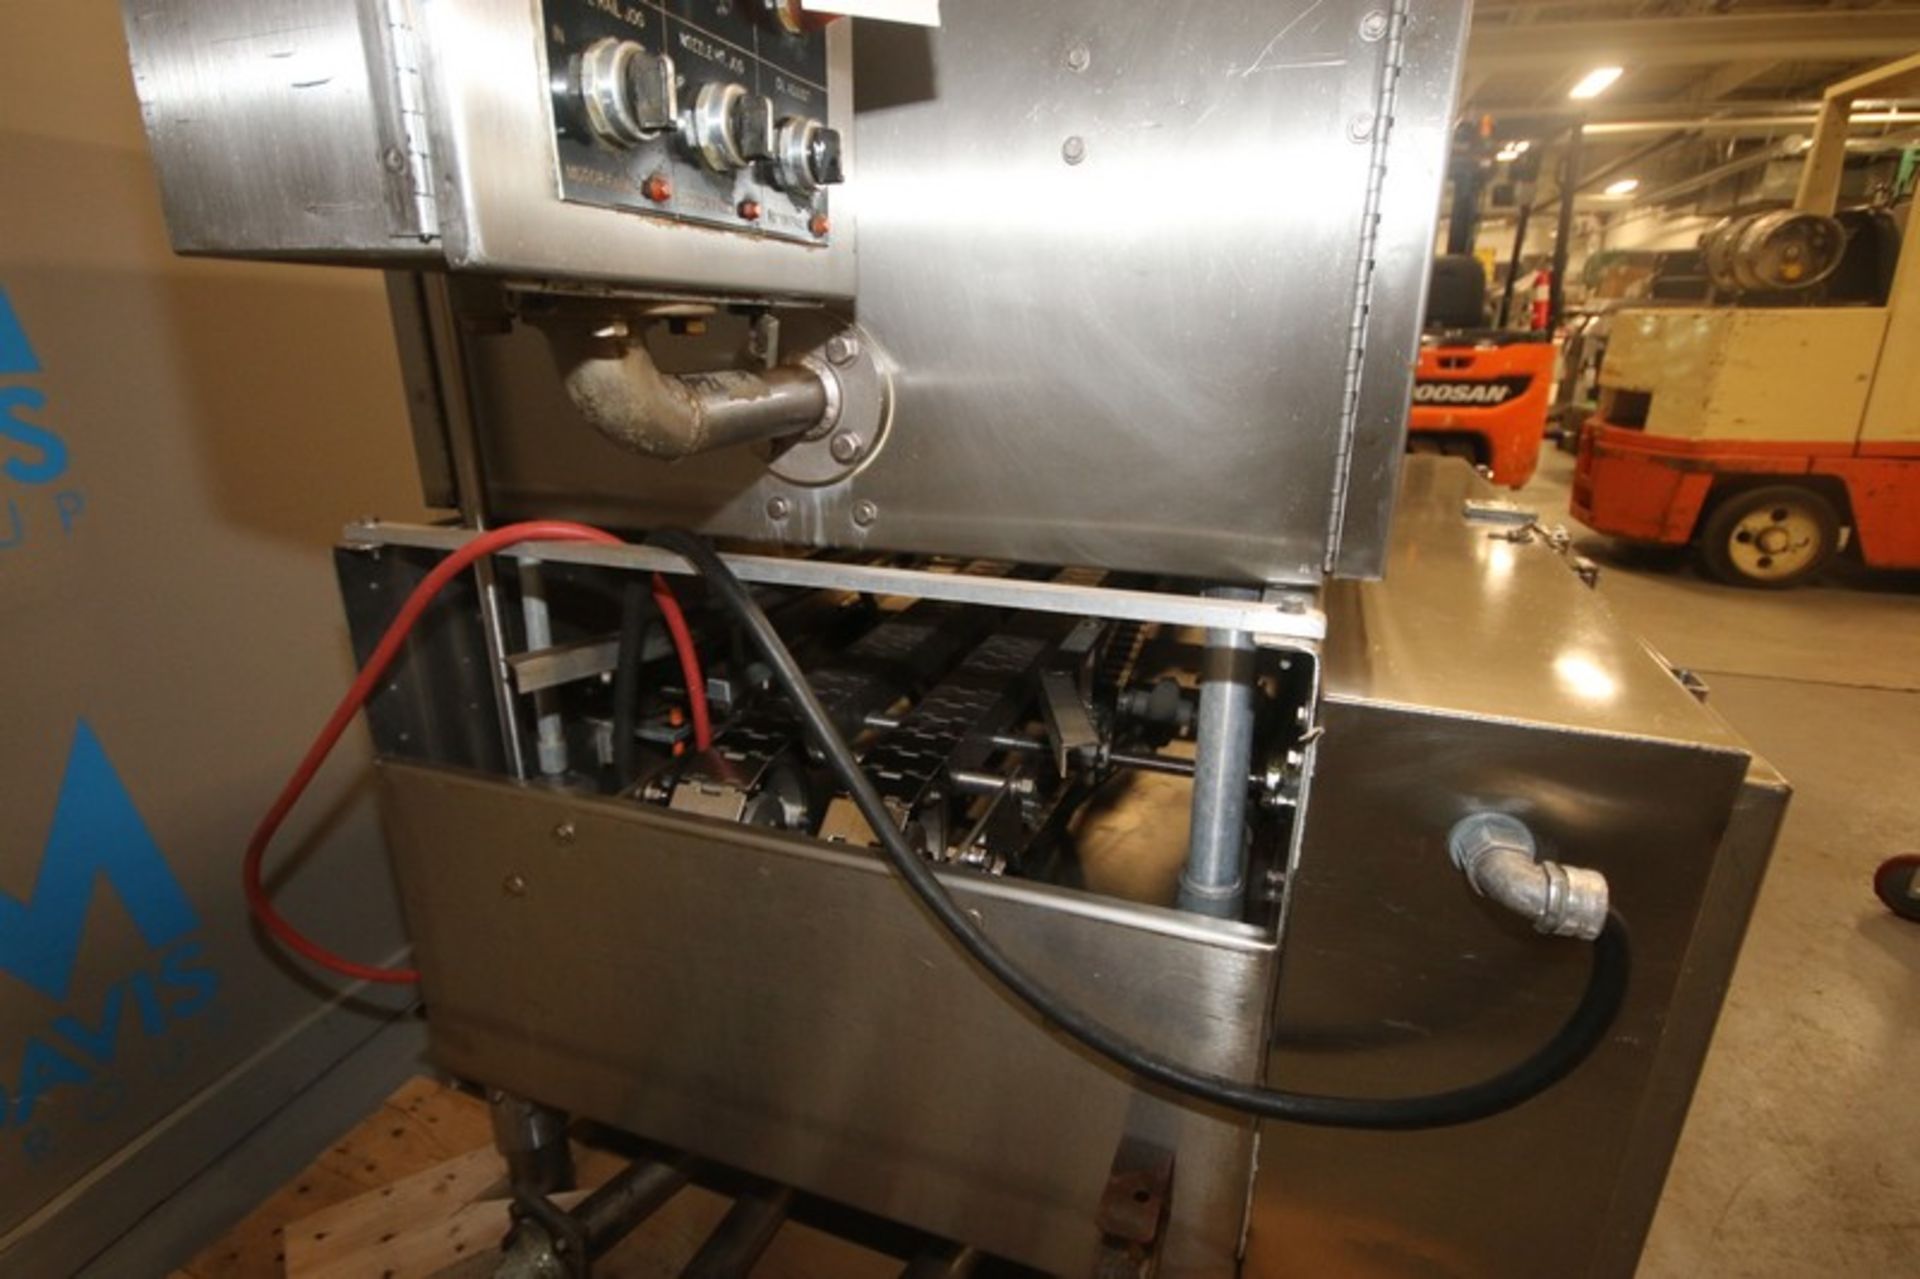 Mallet S/S Bread Pan Oiler, M/N 2001A, S/N 243-456, 460 Volts, 3 Phase, with Casters (INV#77729)( - Image 5 of 11